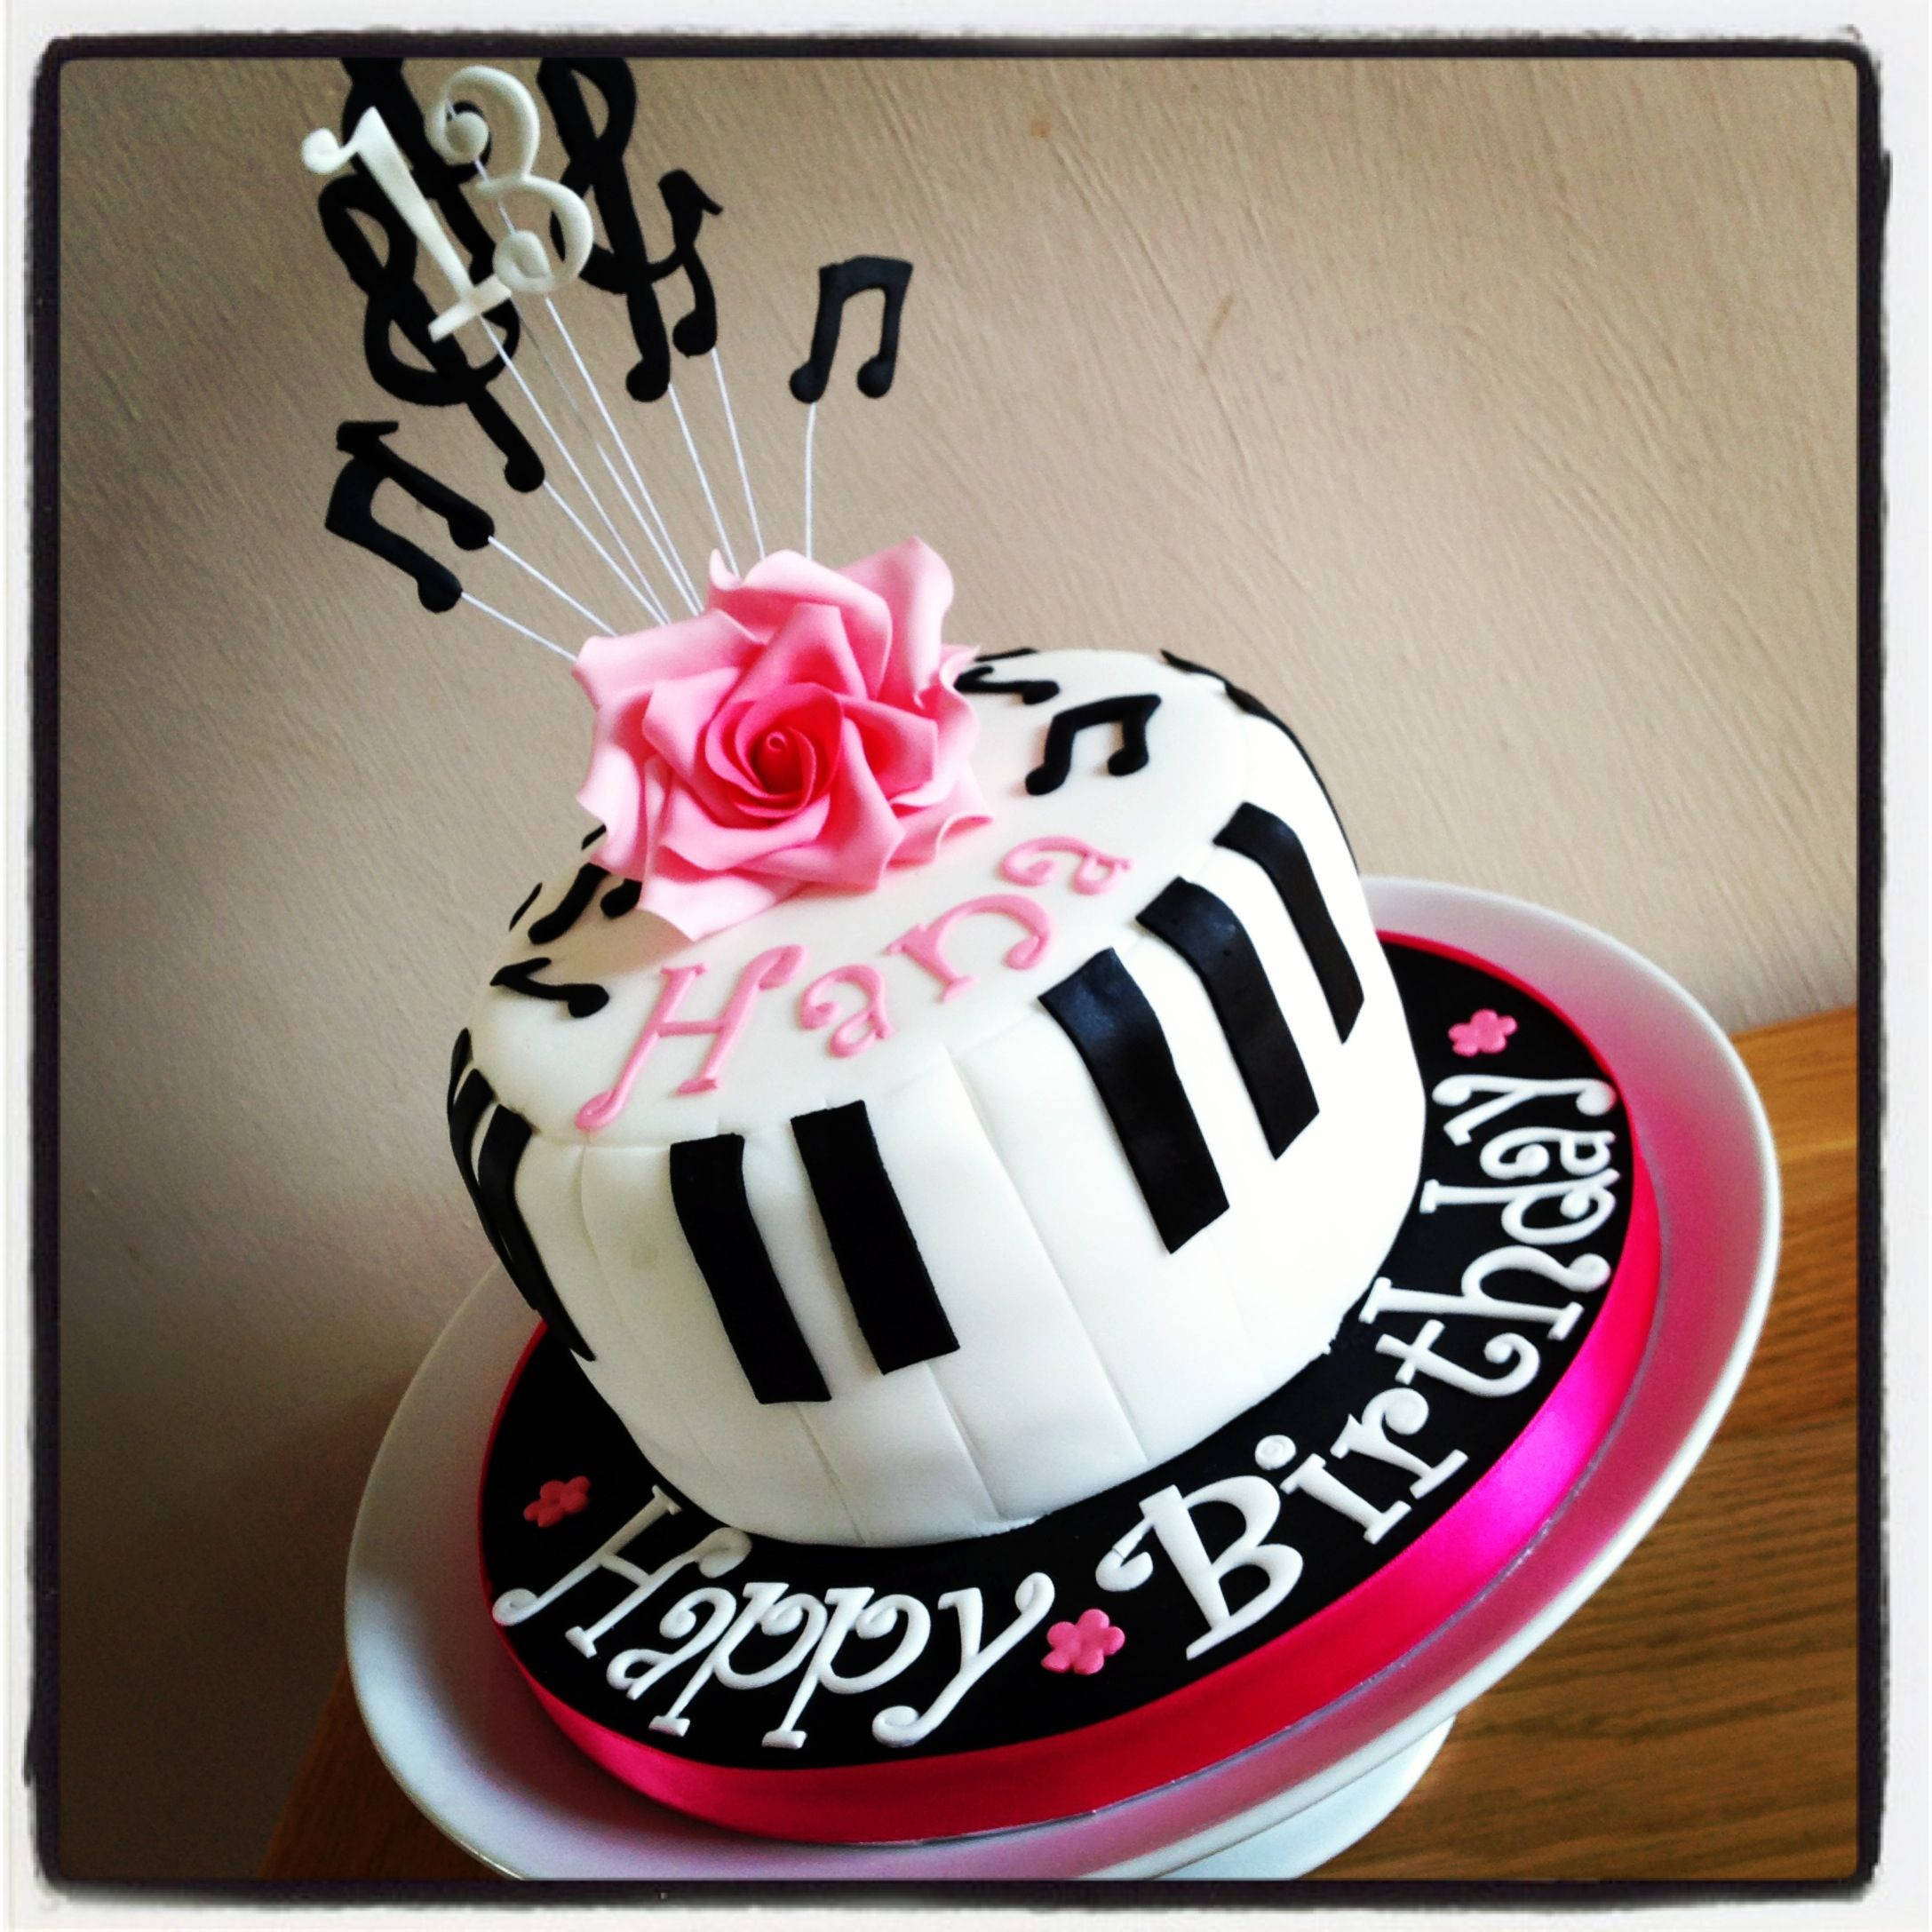 The 20 Best Ideas for Music Birthday Cakes - Home, Family, Style and